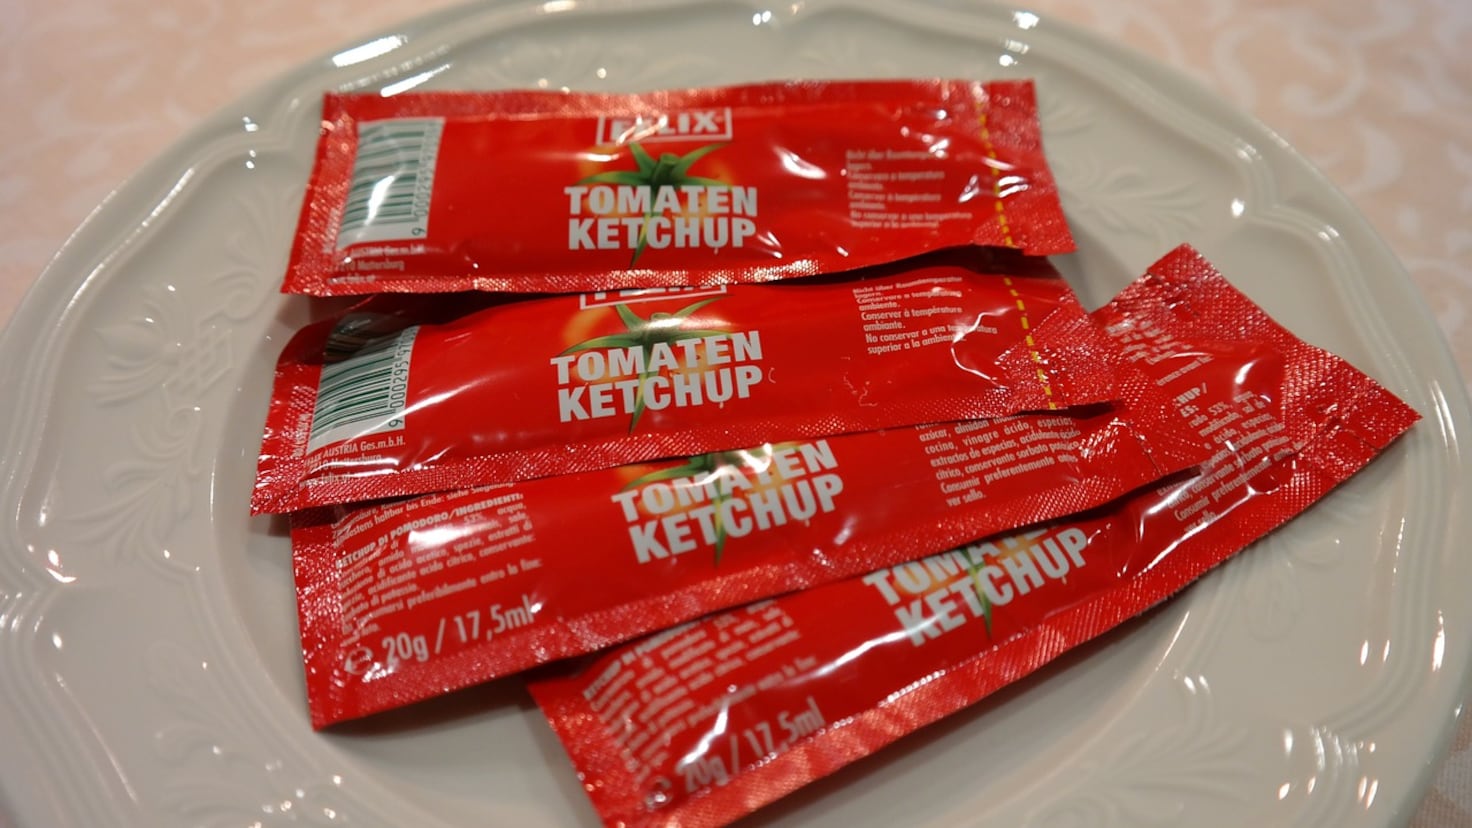 Europe puts an end to ketchup packets and mini personal hygiene bottles
